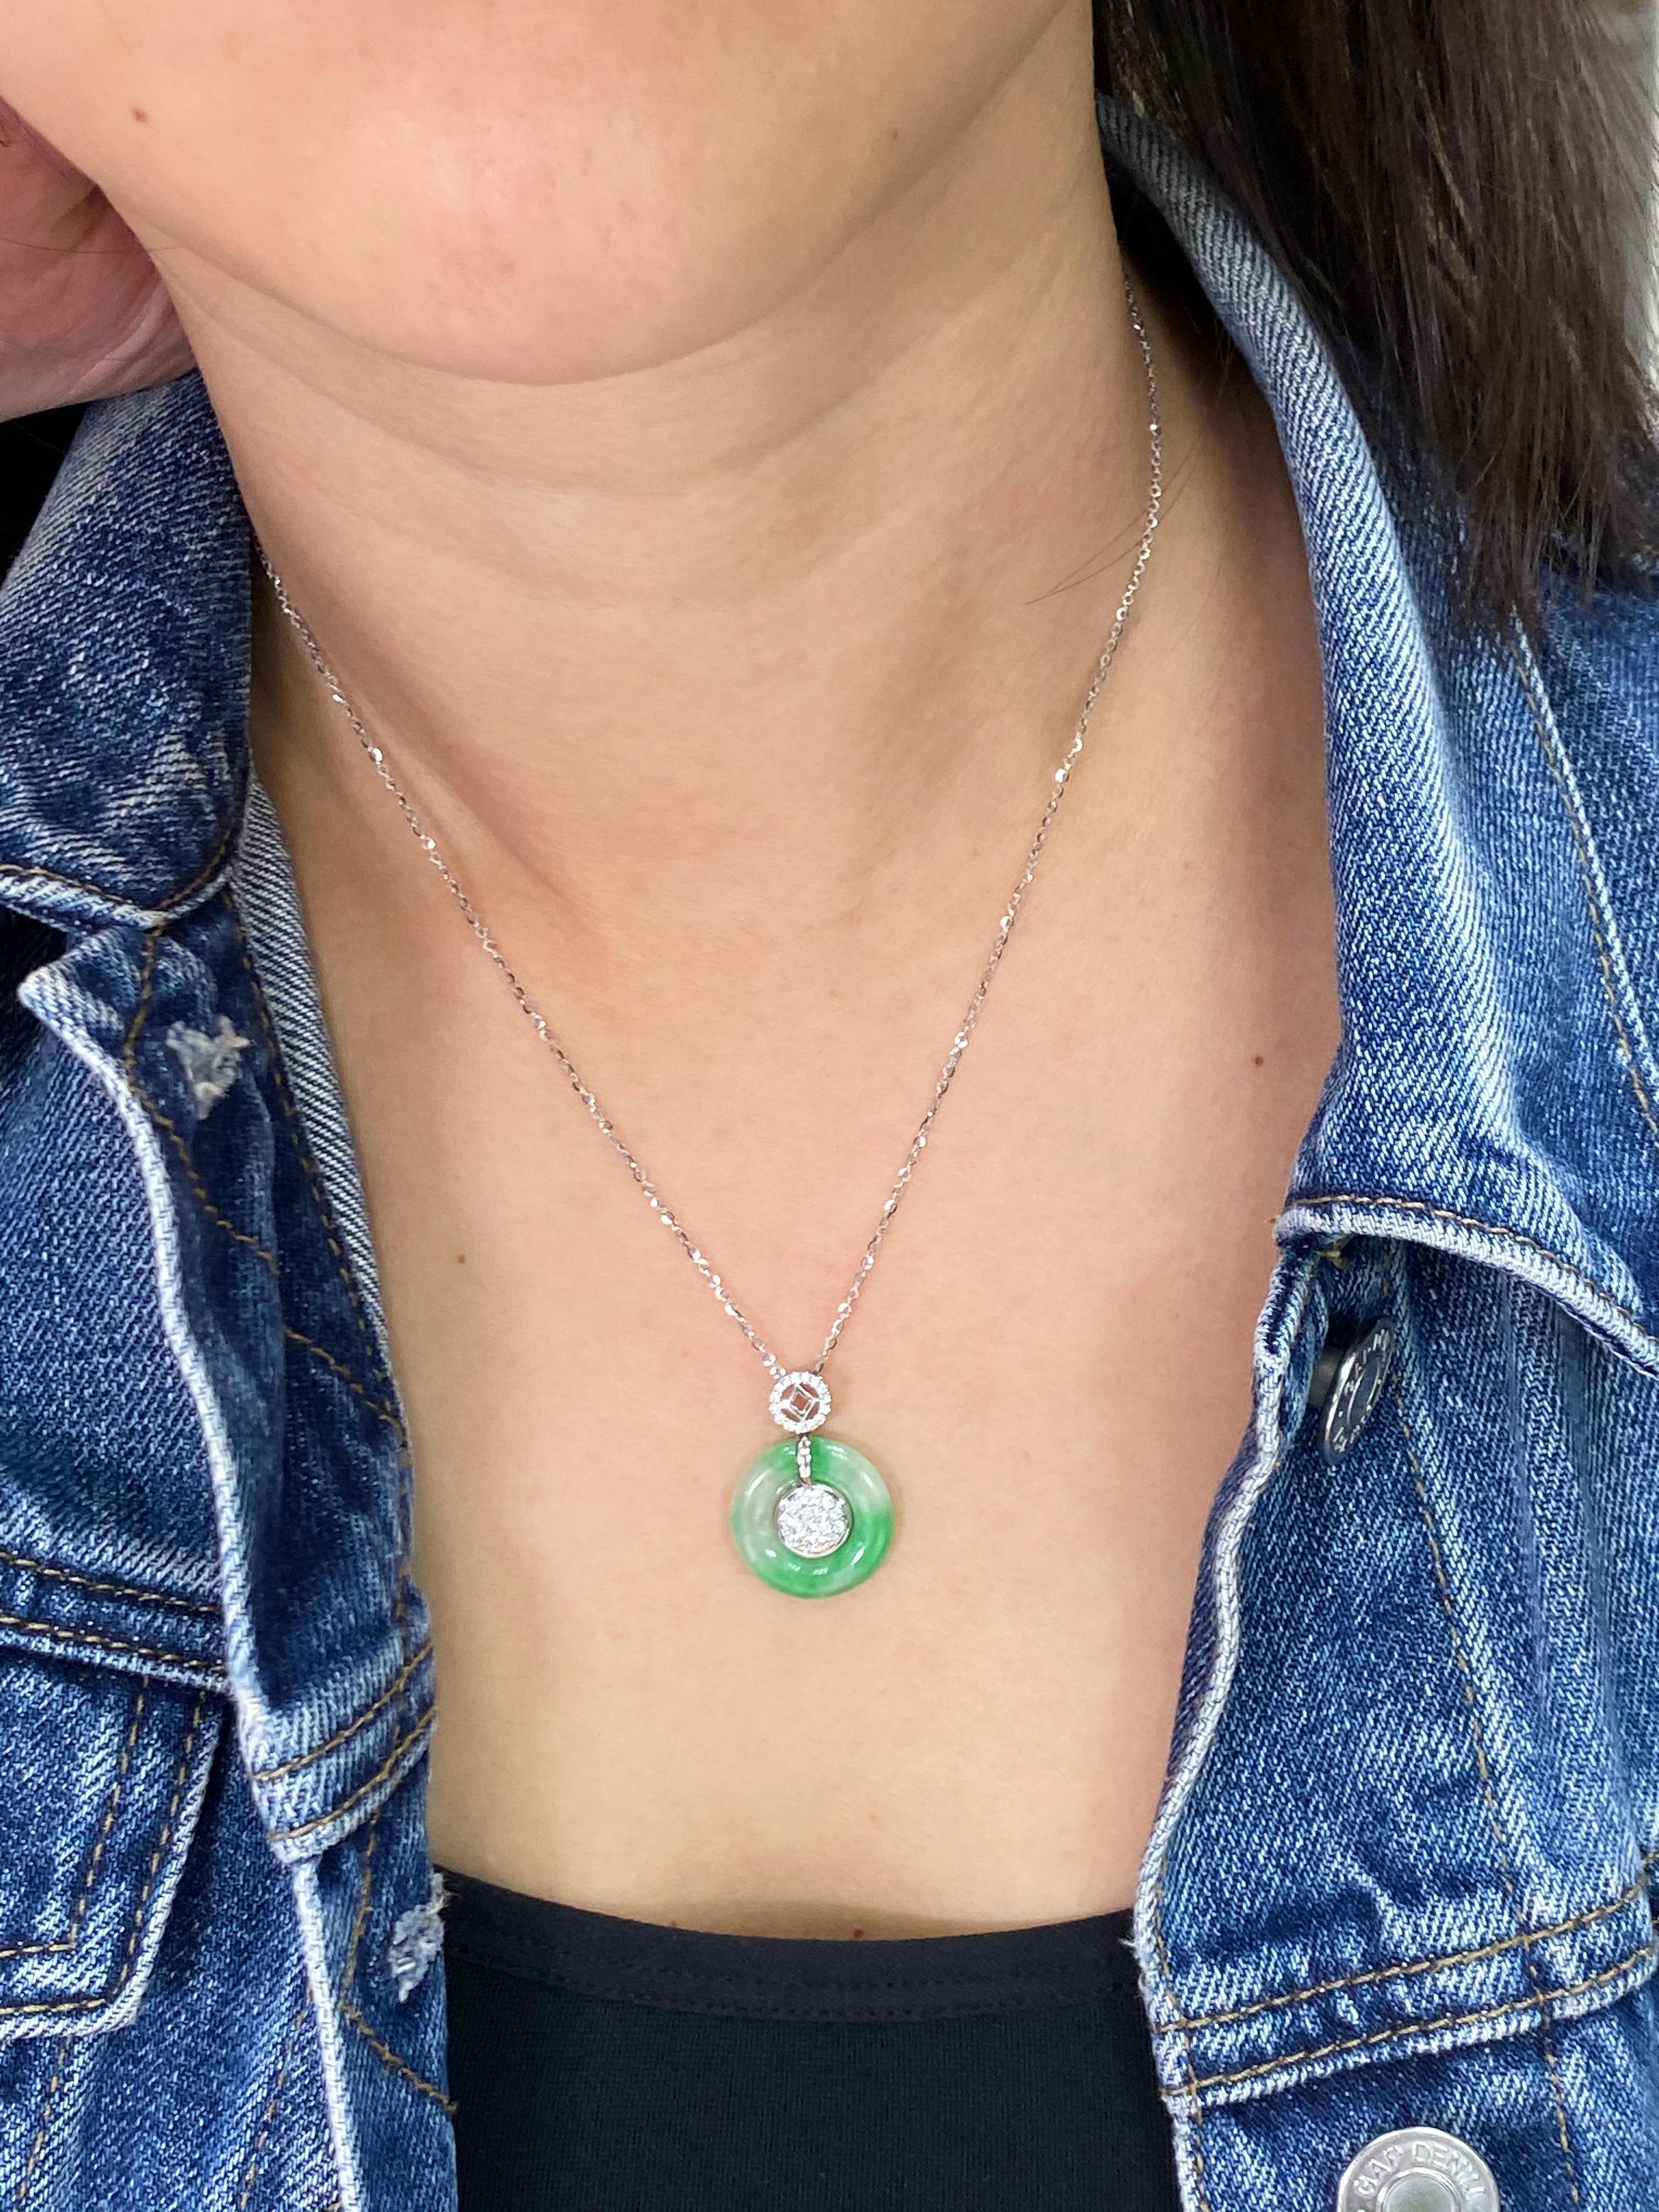 Here is a natural Jadeite Jade and diamond pendant with excellent apple green patches covering around 50% of the jade. It is certified by 2 labs. The pendant is set in 18k white gold and diamonds. The pendant is reversible. On one side the inner